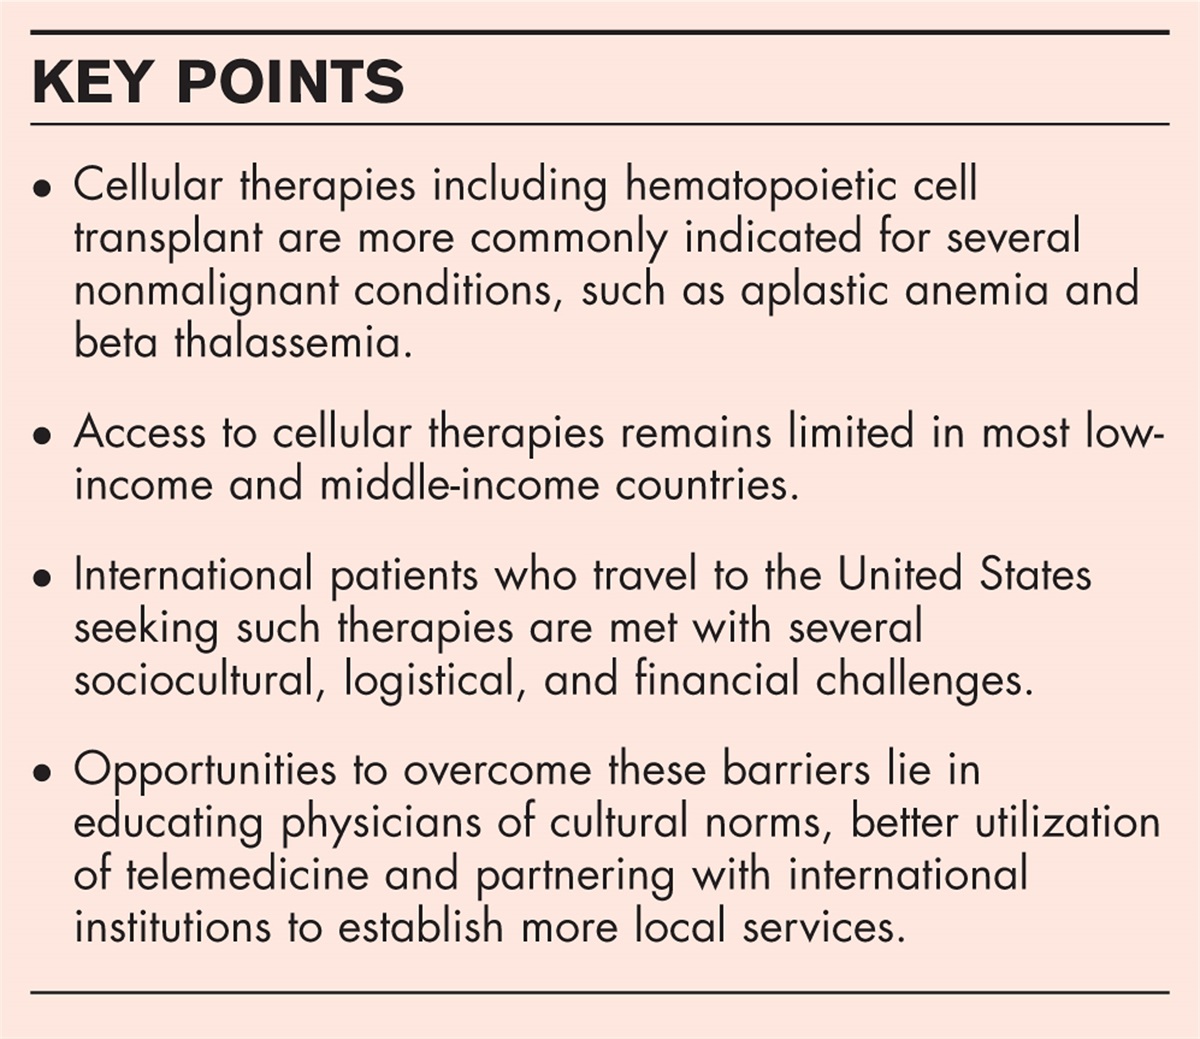 Challenges and opportunities in shared care for international patients treated with cellular therapy for nonmalignant disease